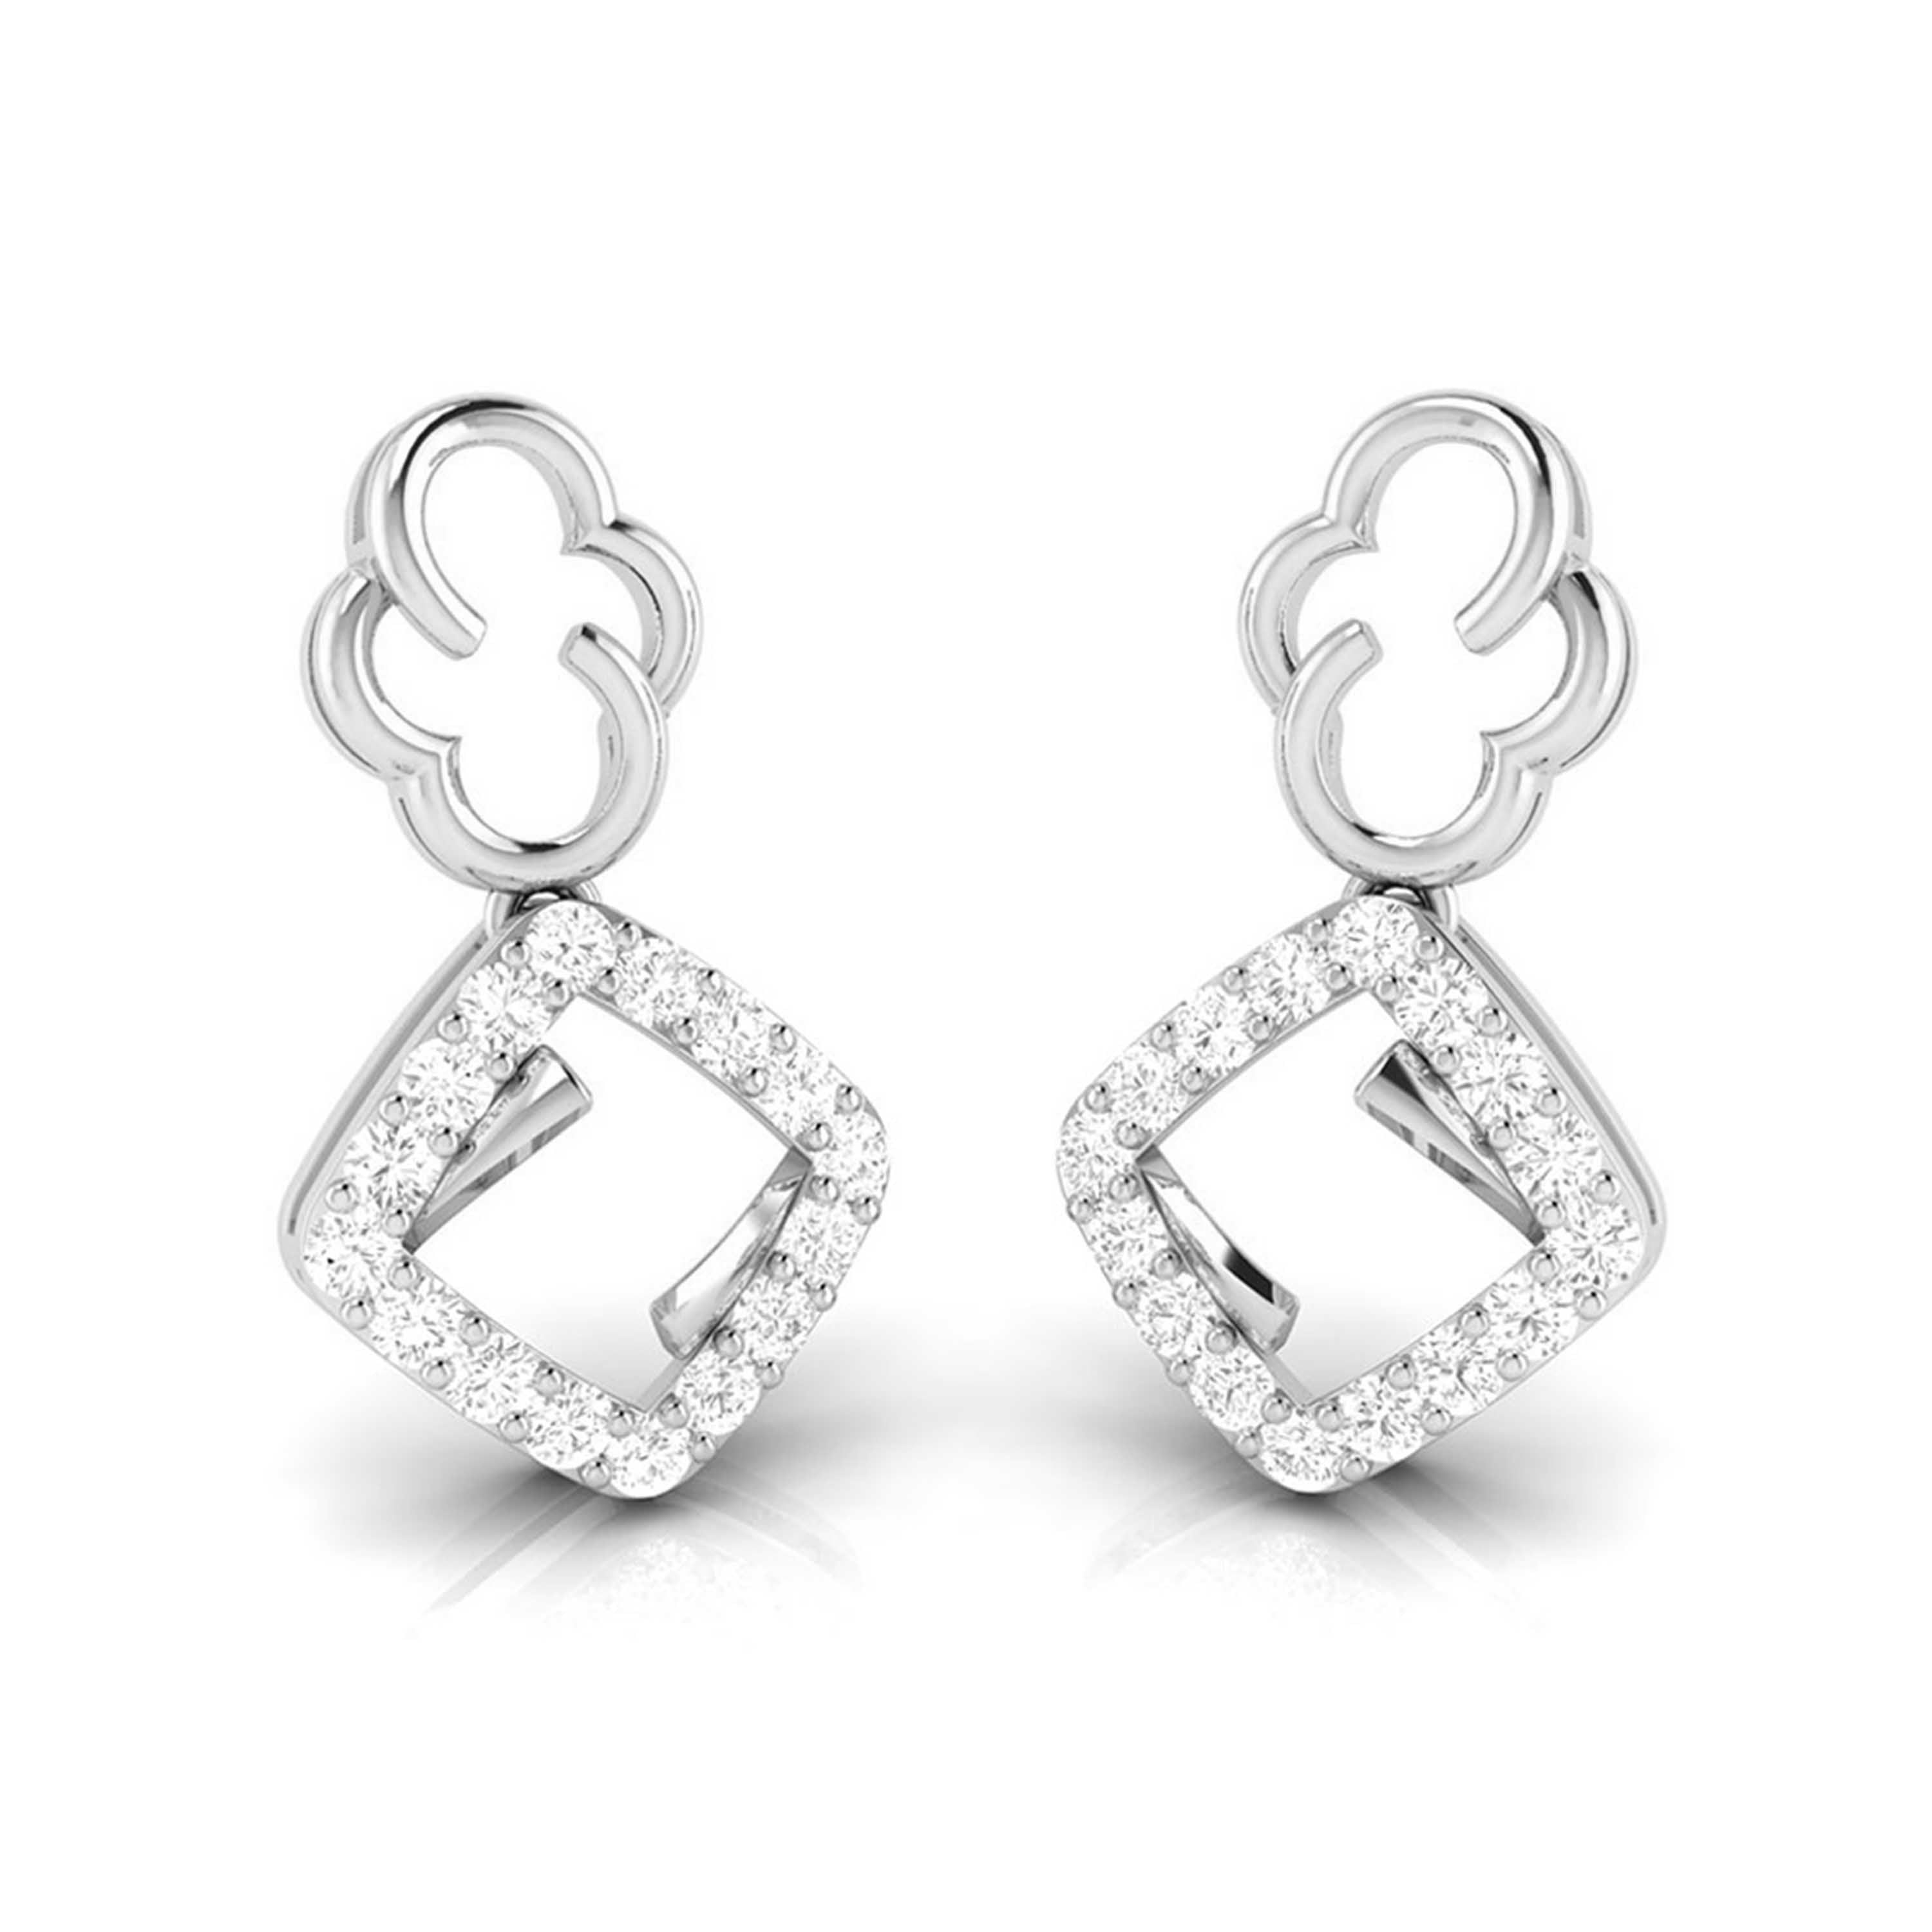 Buy Platinum Plated Square White Pearl Drop Earrings online from Karat Cart